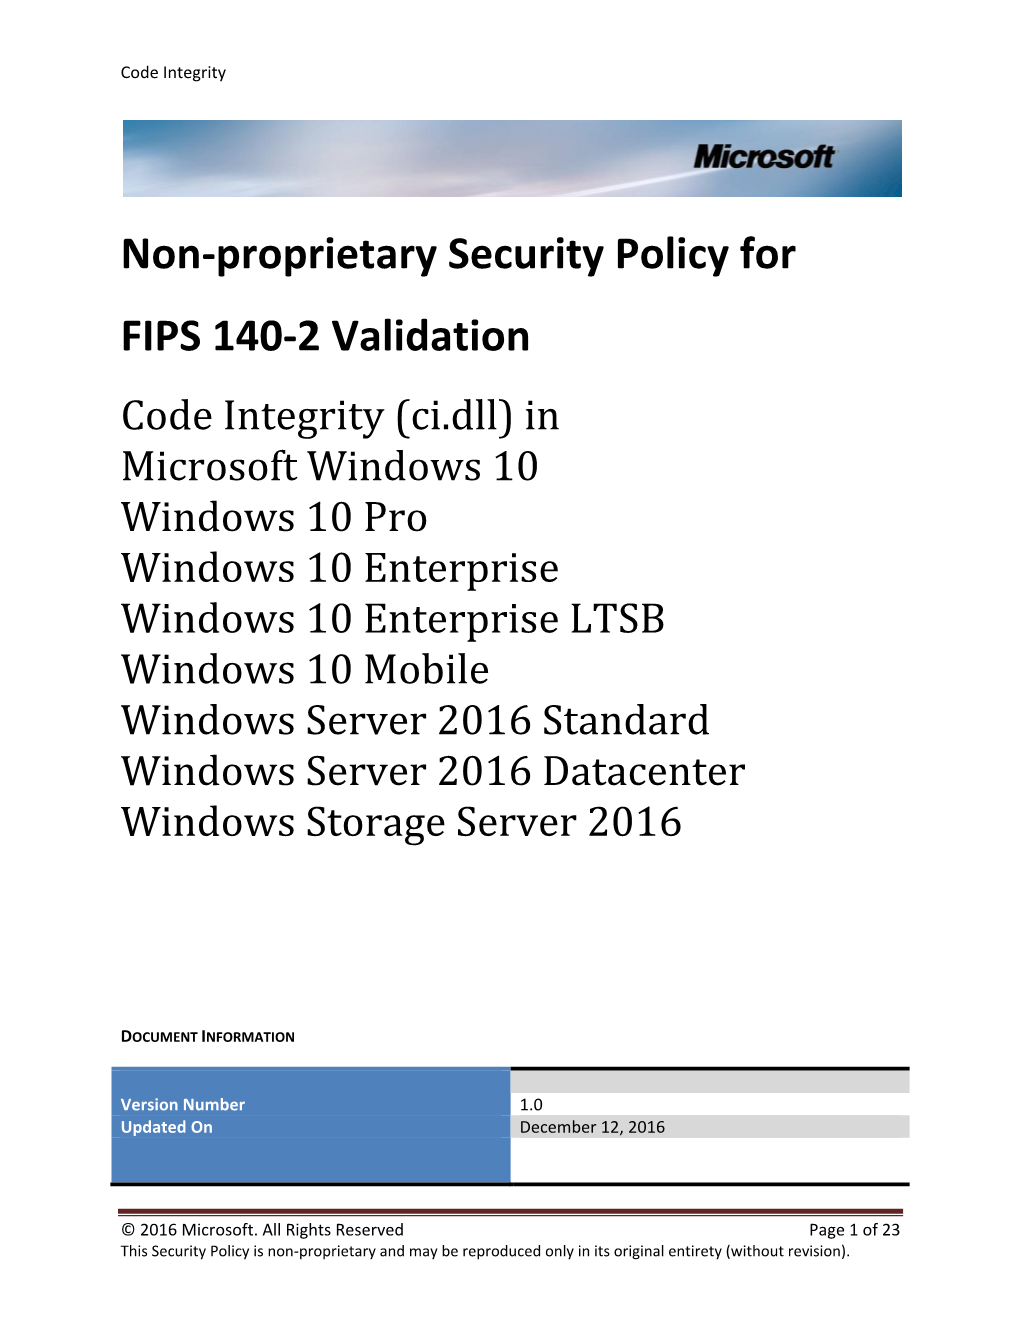 Non-Proprietary Security Policy for FIPS 140-2 Validation